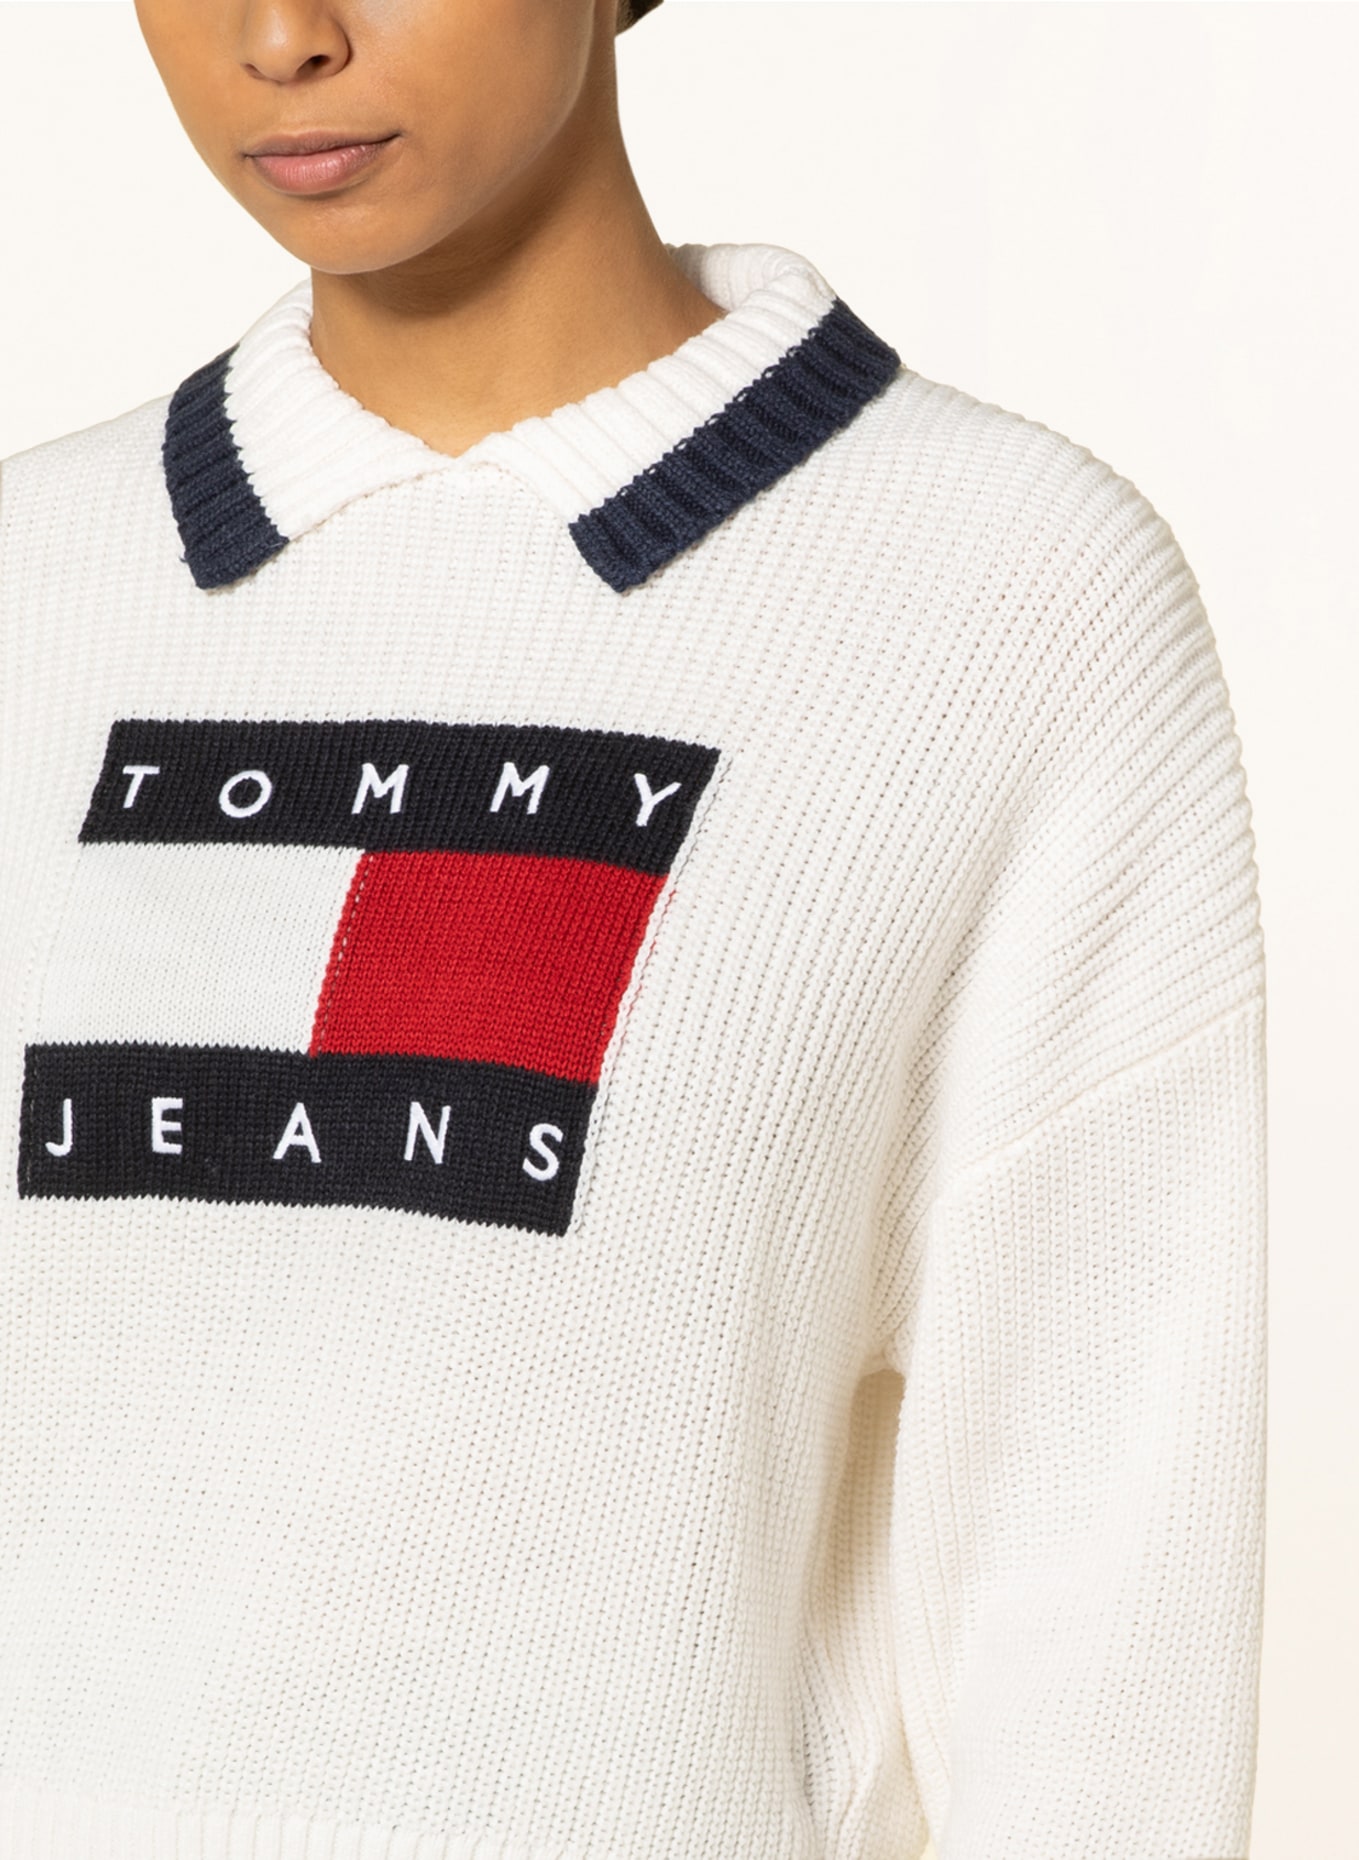 TOMMY JEANS Sweater white/ blue/ red